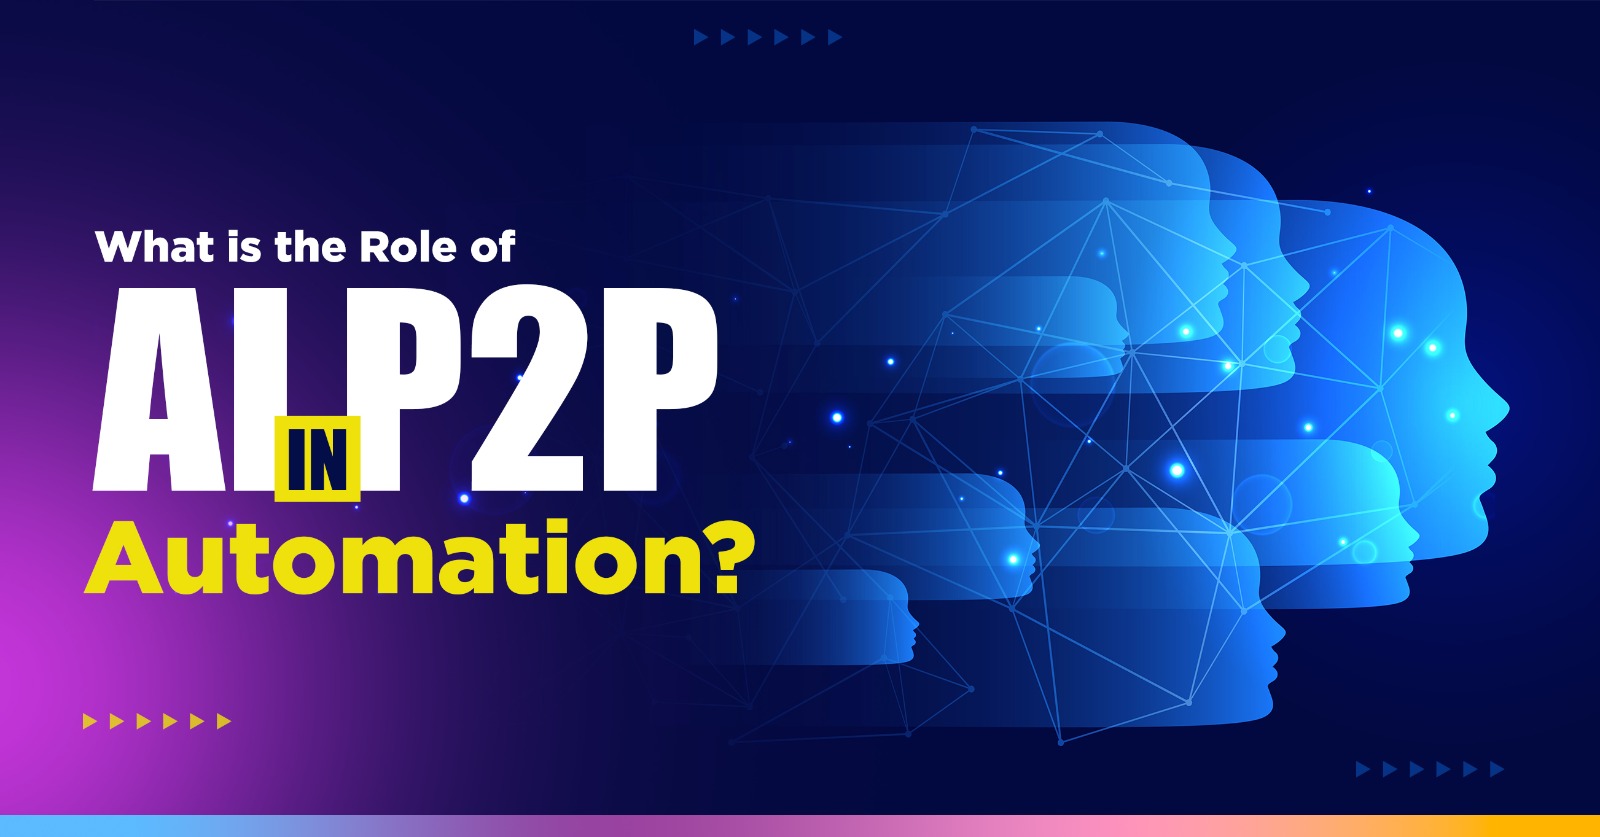 What is the Role of AI in P2P Automation?